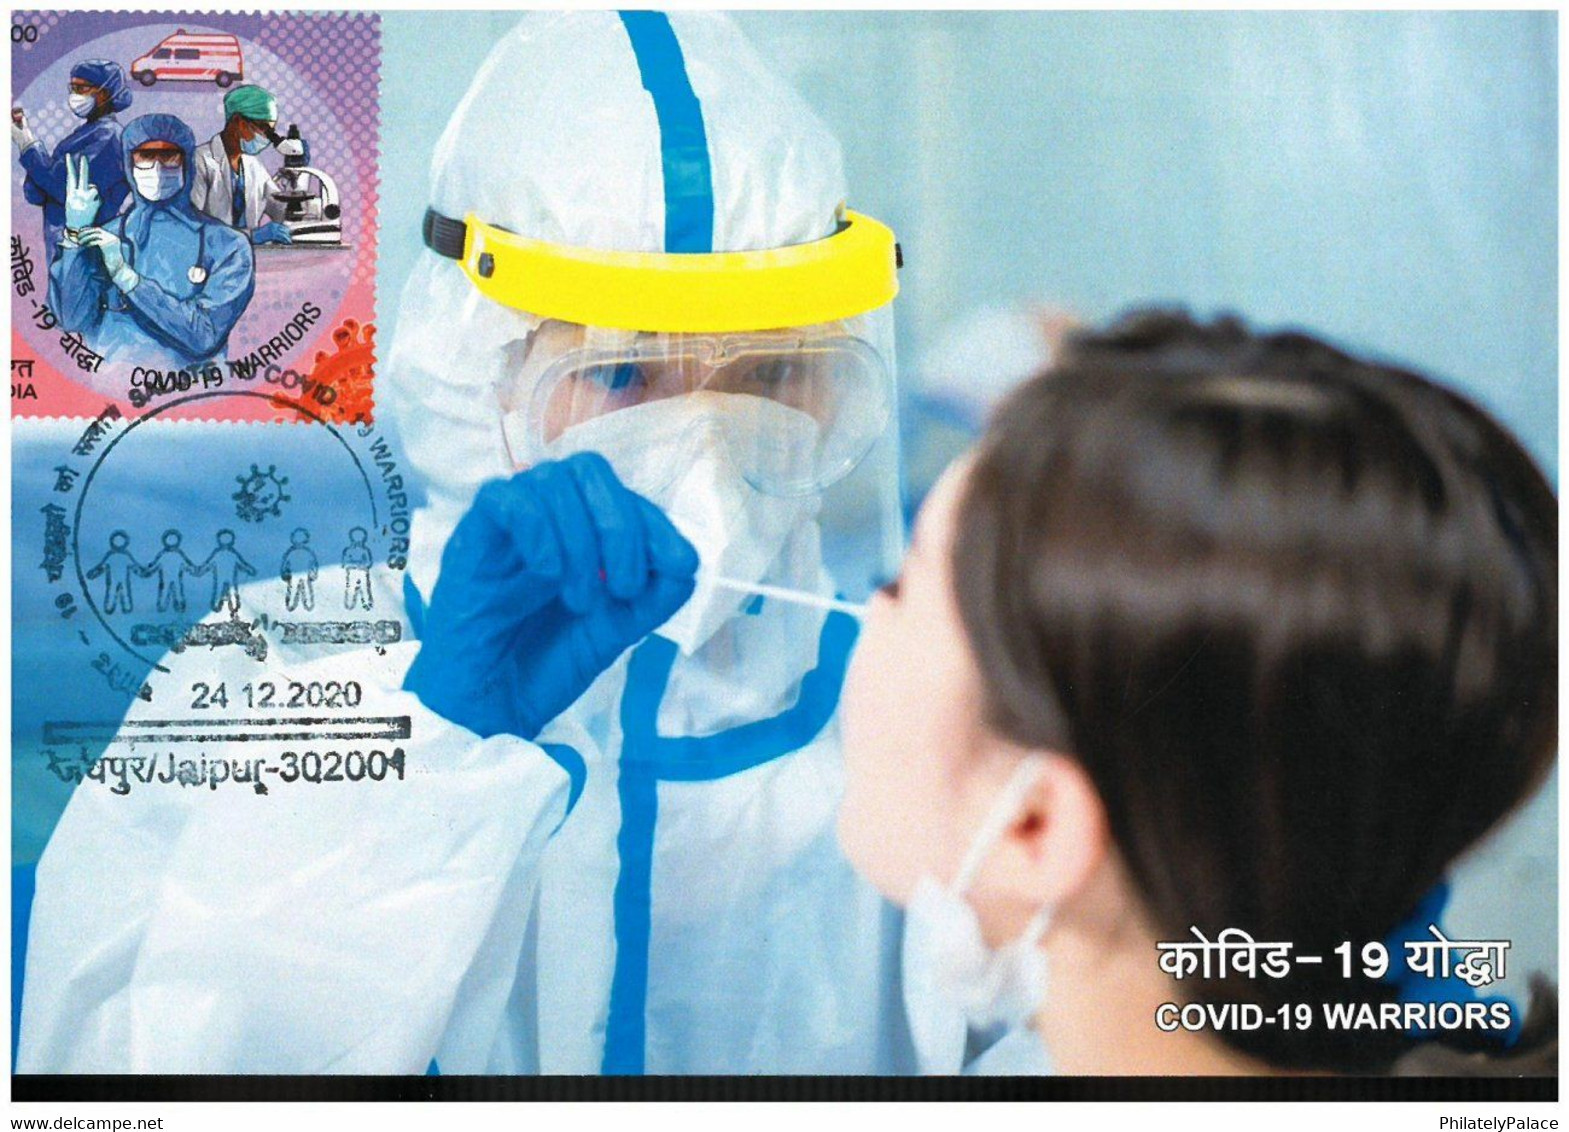 India 2020 *** 25 Different COVID-19 ,Coronavirus ,Doctor, Mask, Maxim card (Set of 25) (**) Inde Indien 1 SET avaliable